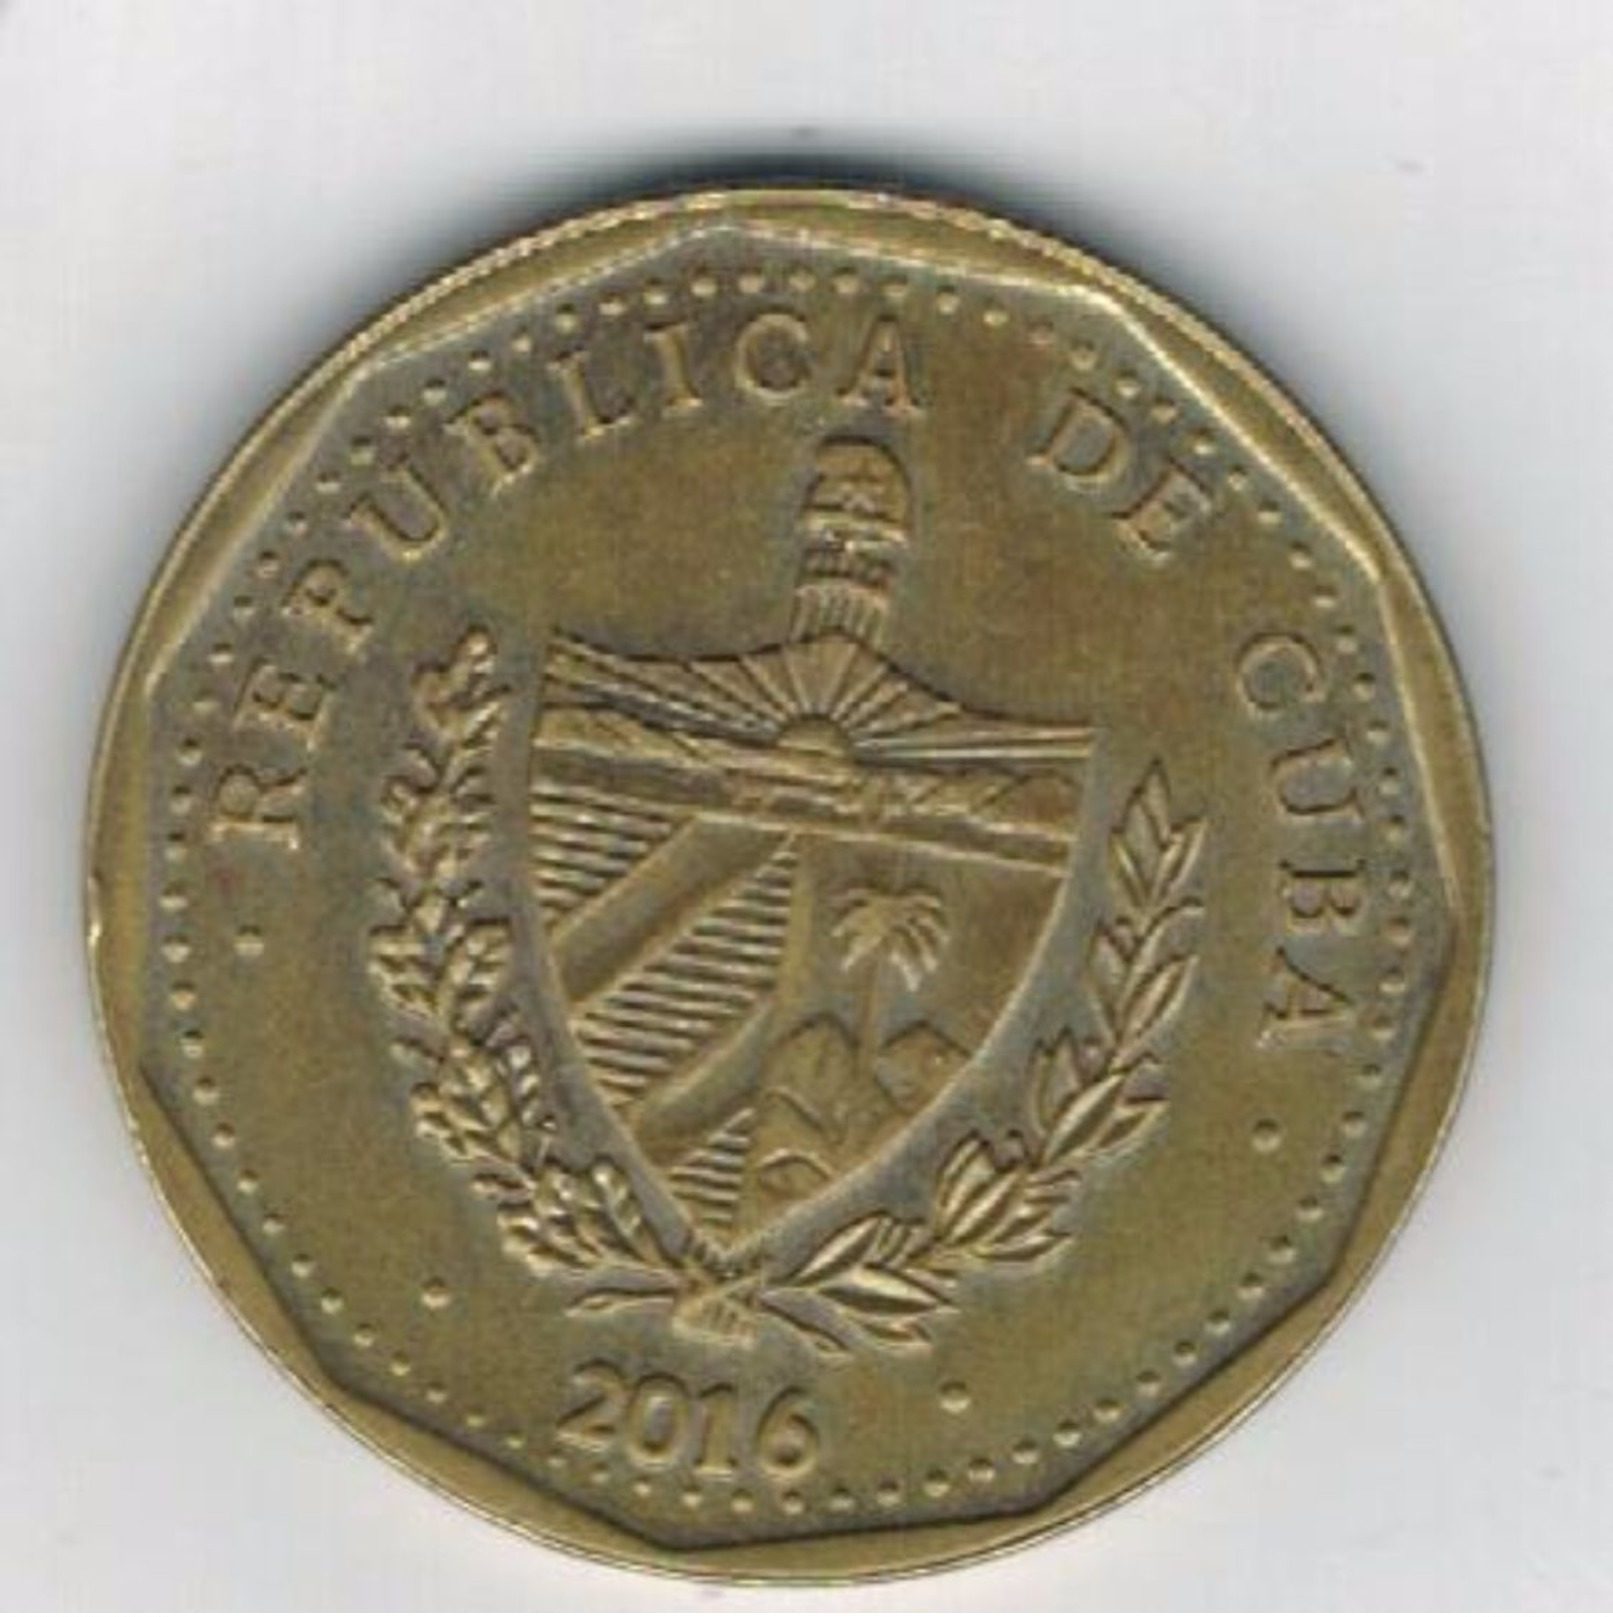 Cuba 1 Peso  2016, AUNC, No Paypal For This Kind Of Item.  FREE SHIP. TO USA. - Cuba